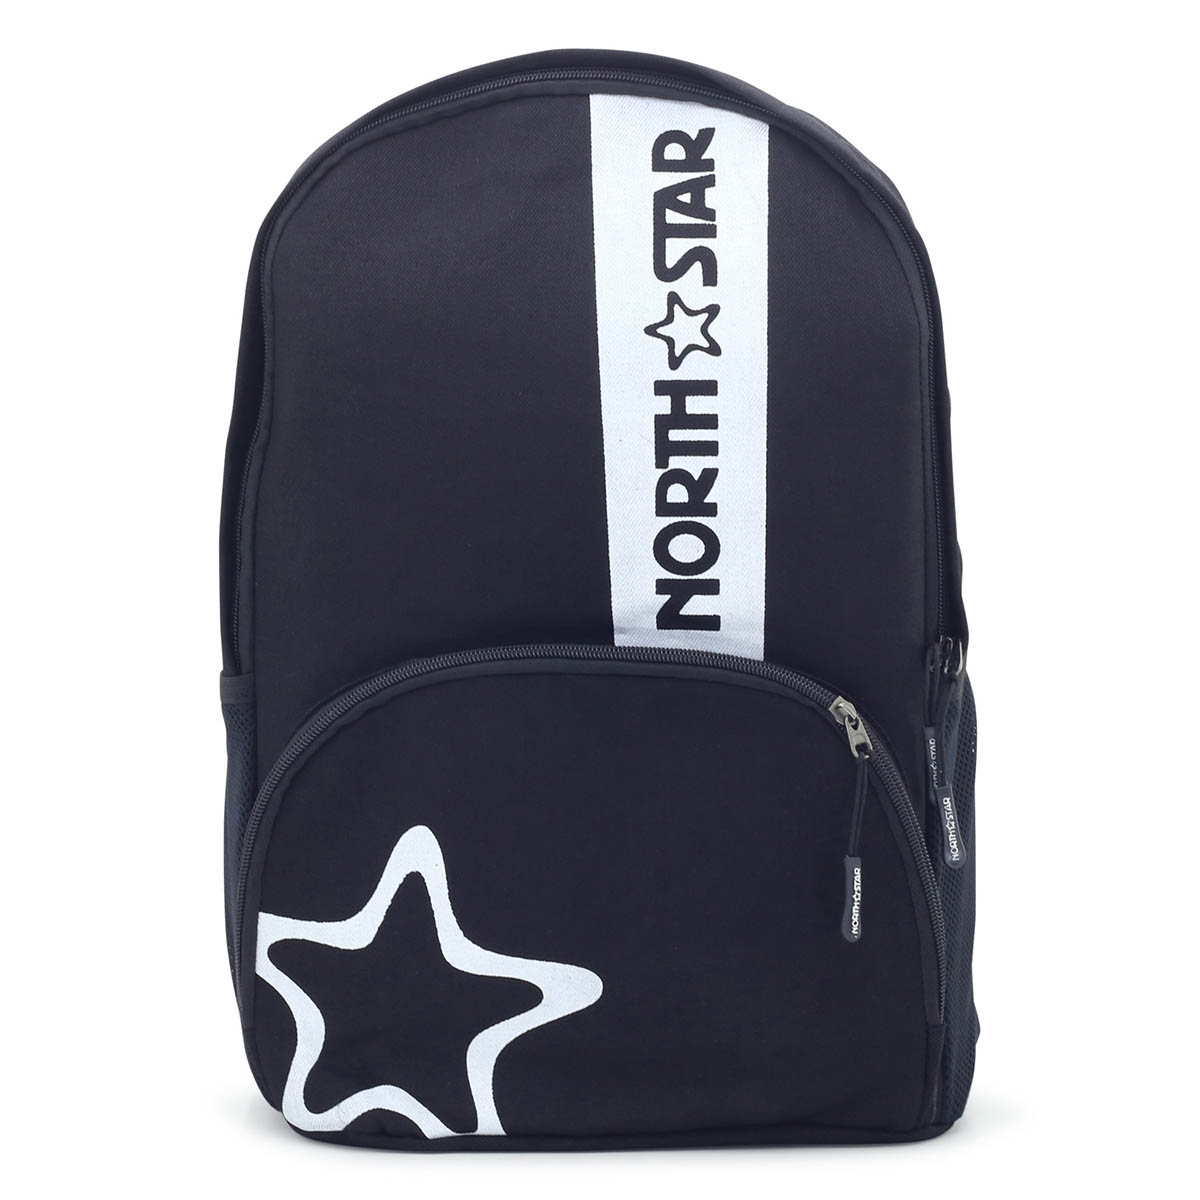 north star backpack